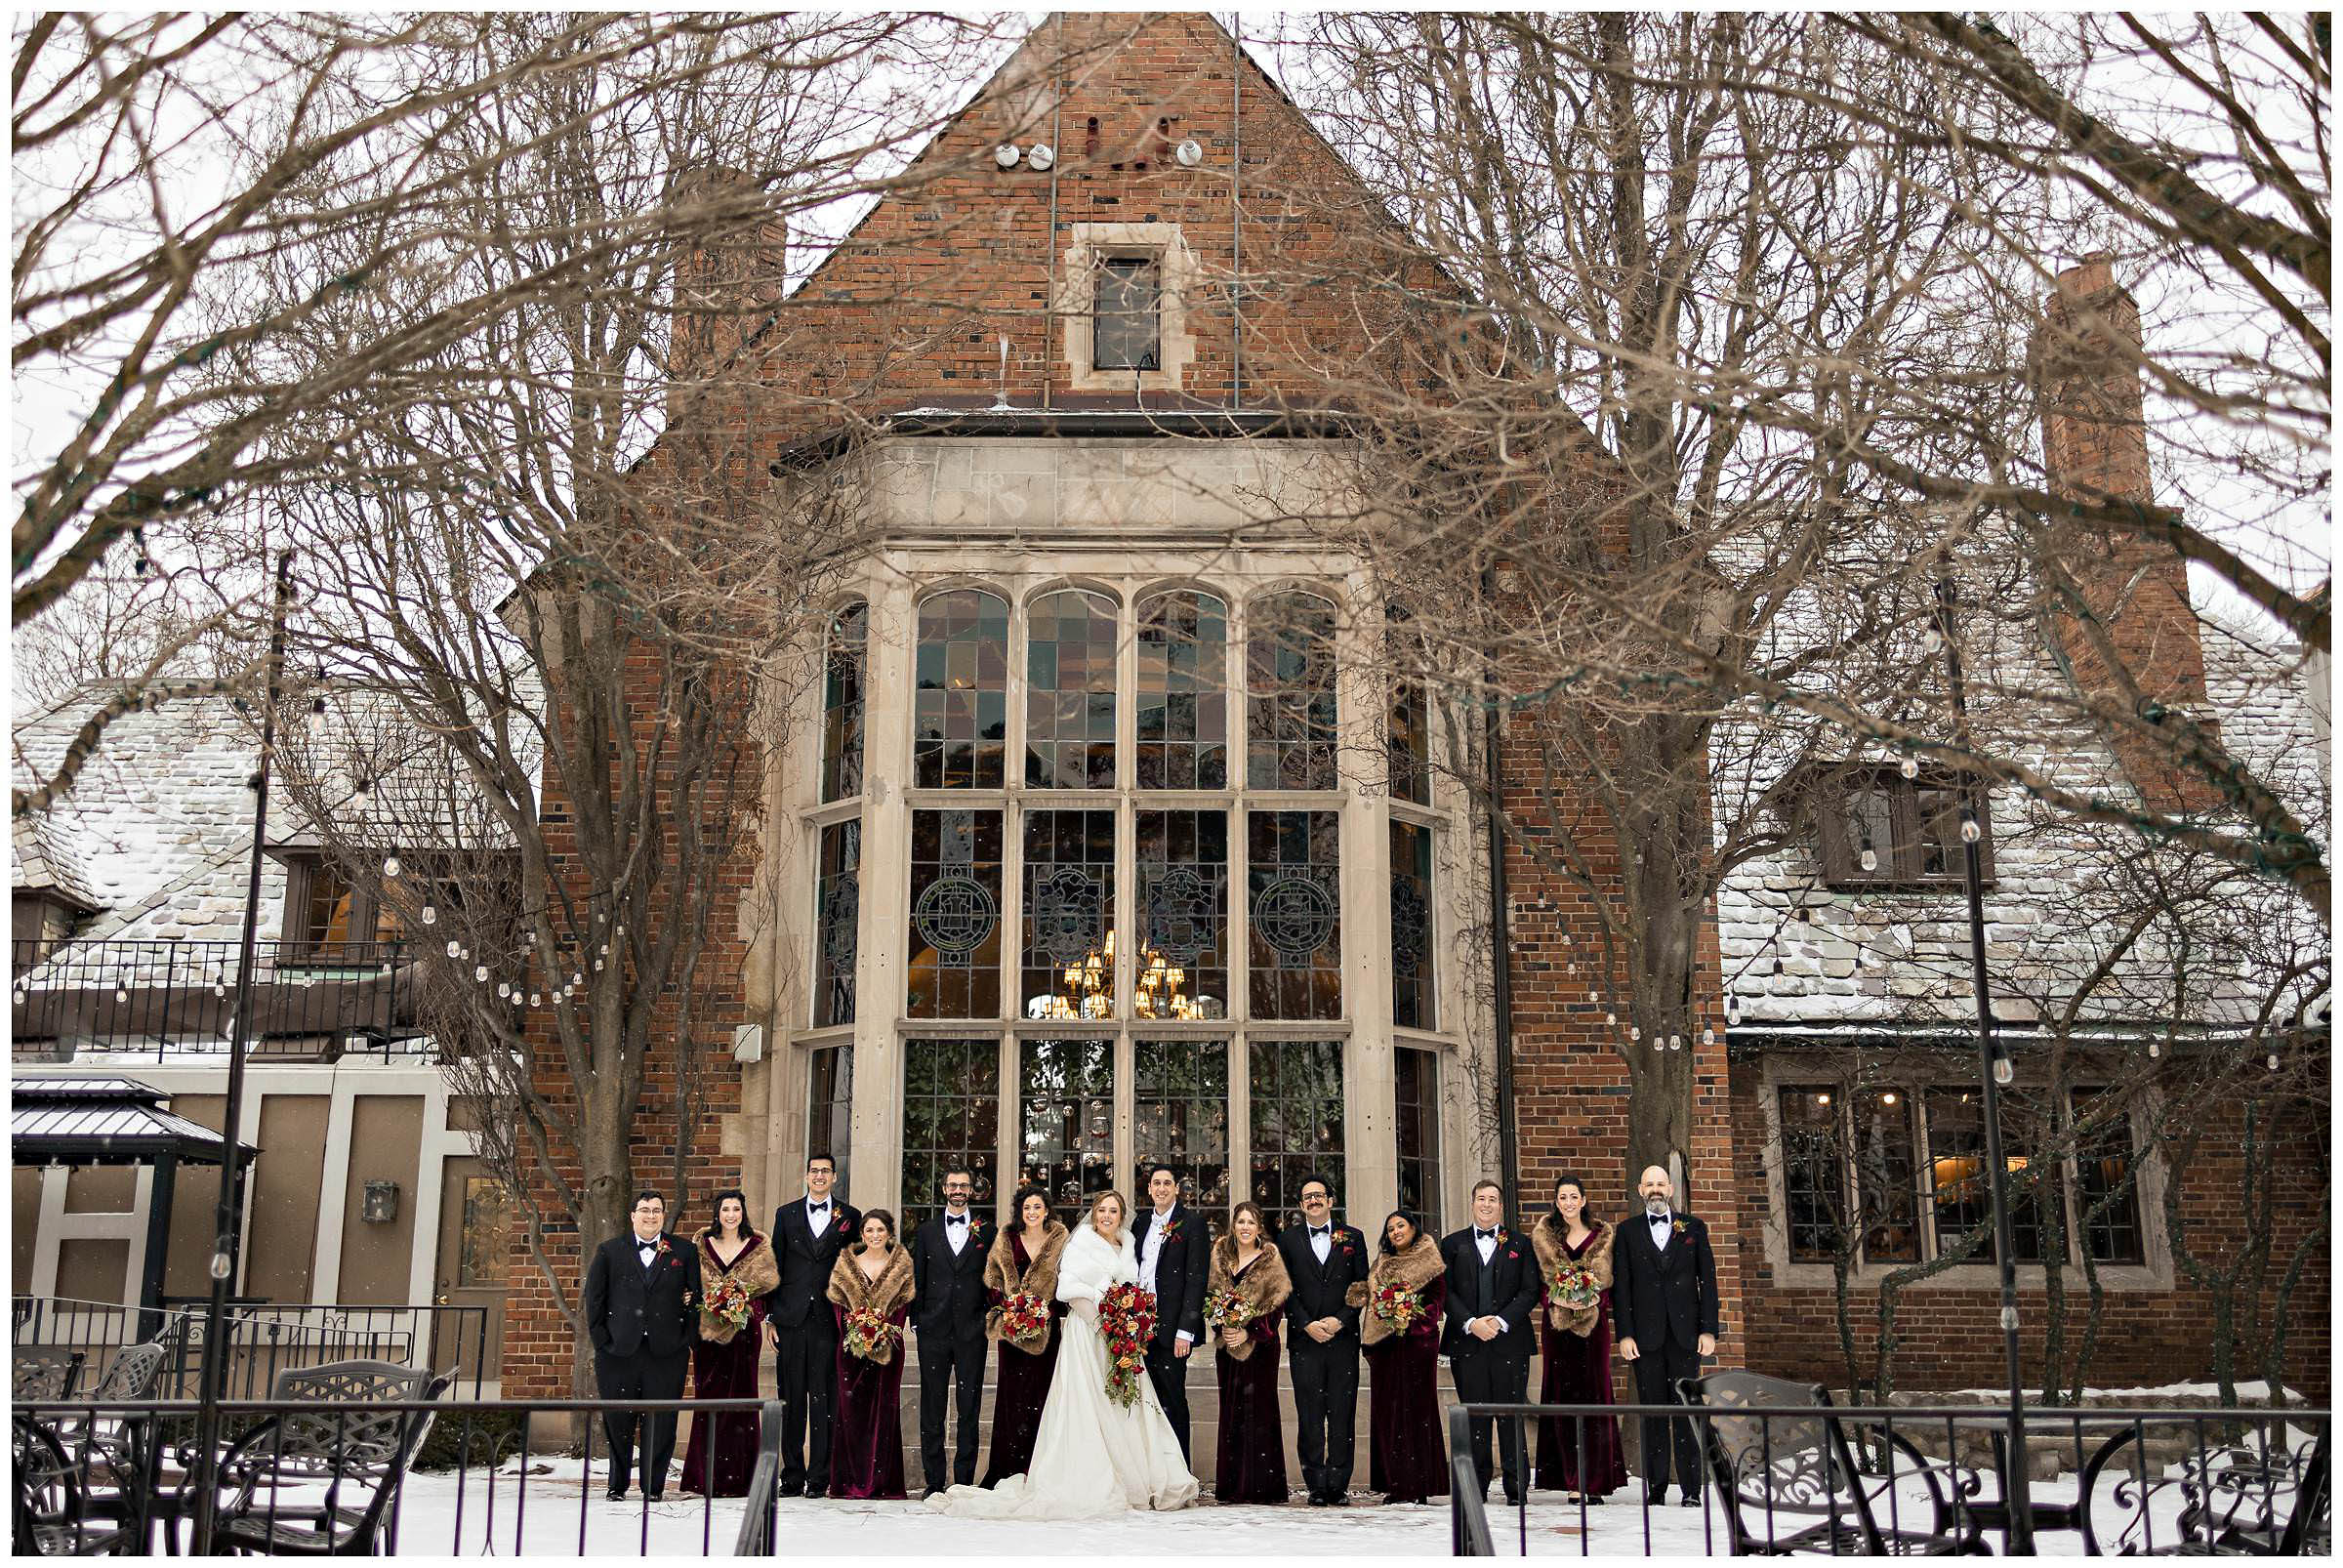 Bridal party formals outside in the snow by Detroit Wedding Photographer Michele Maloney